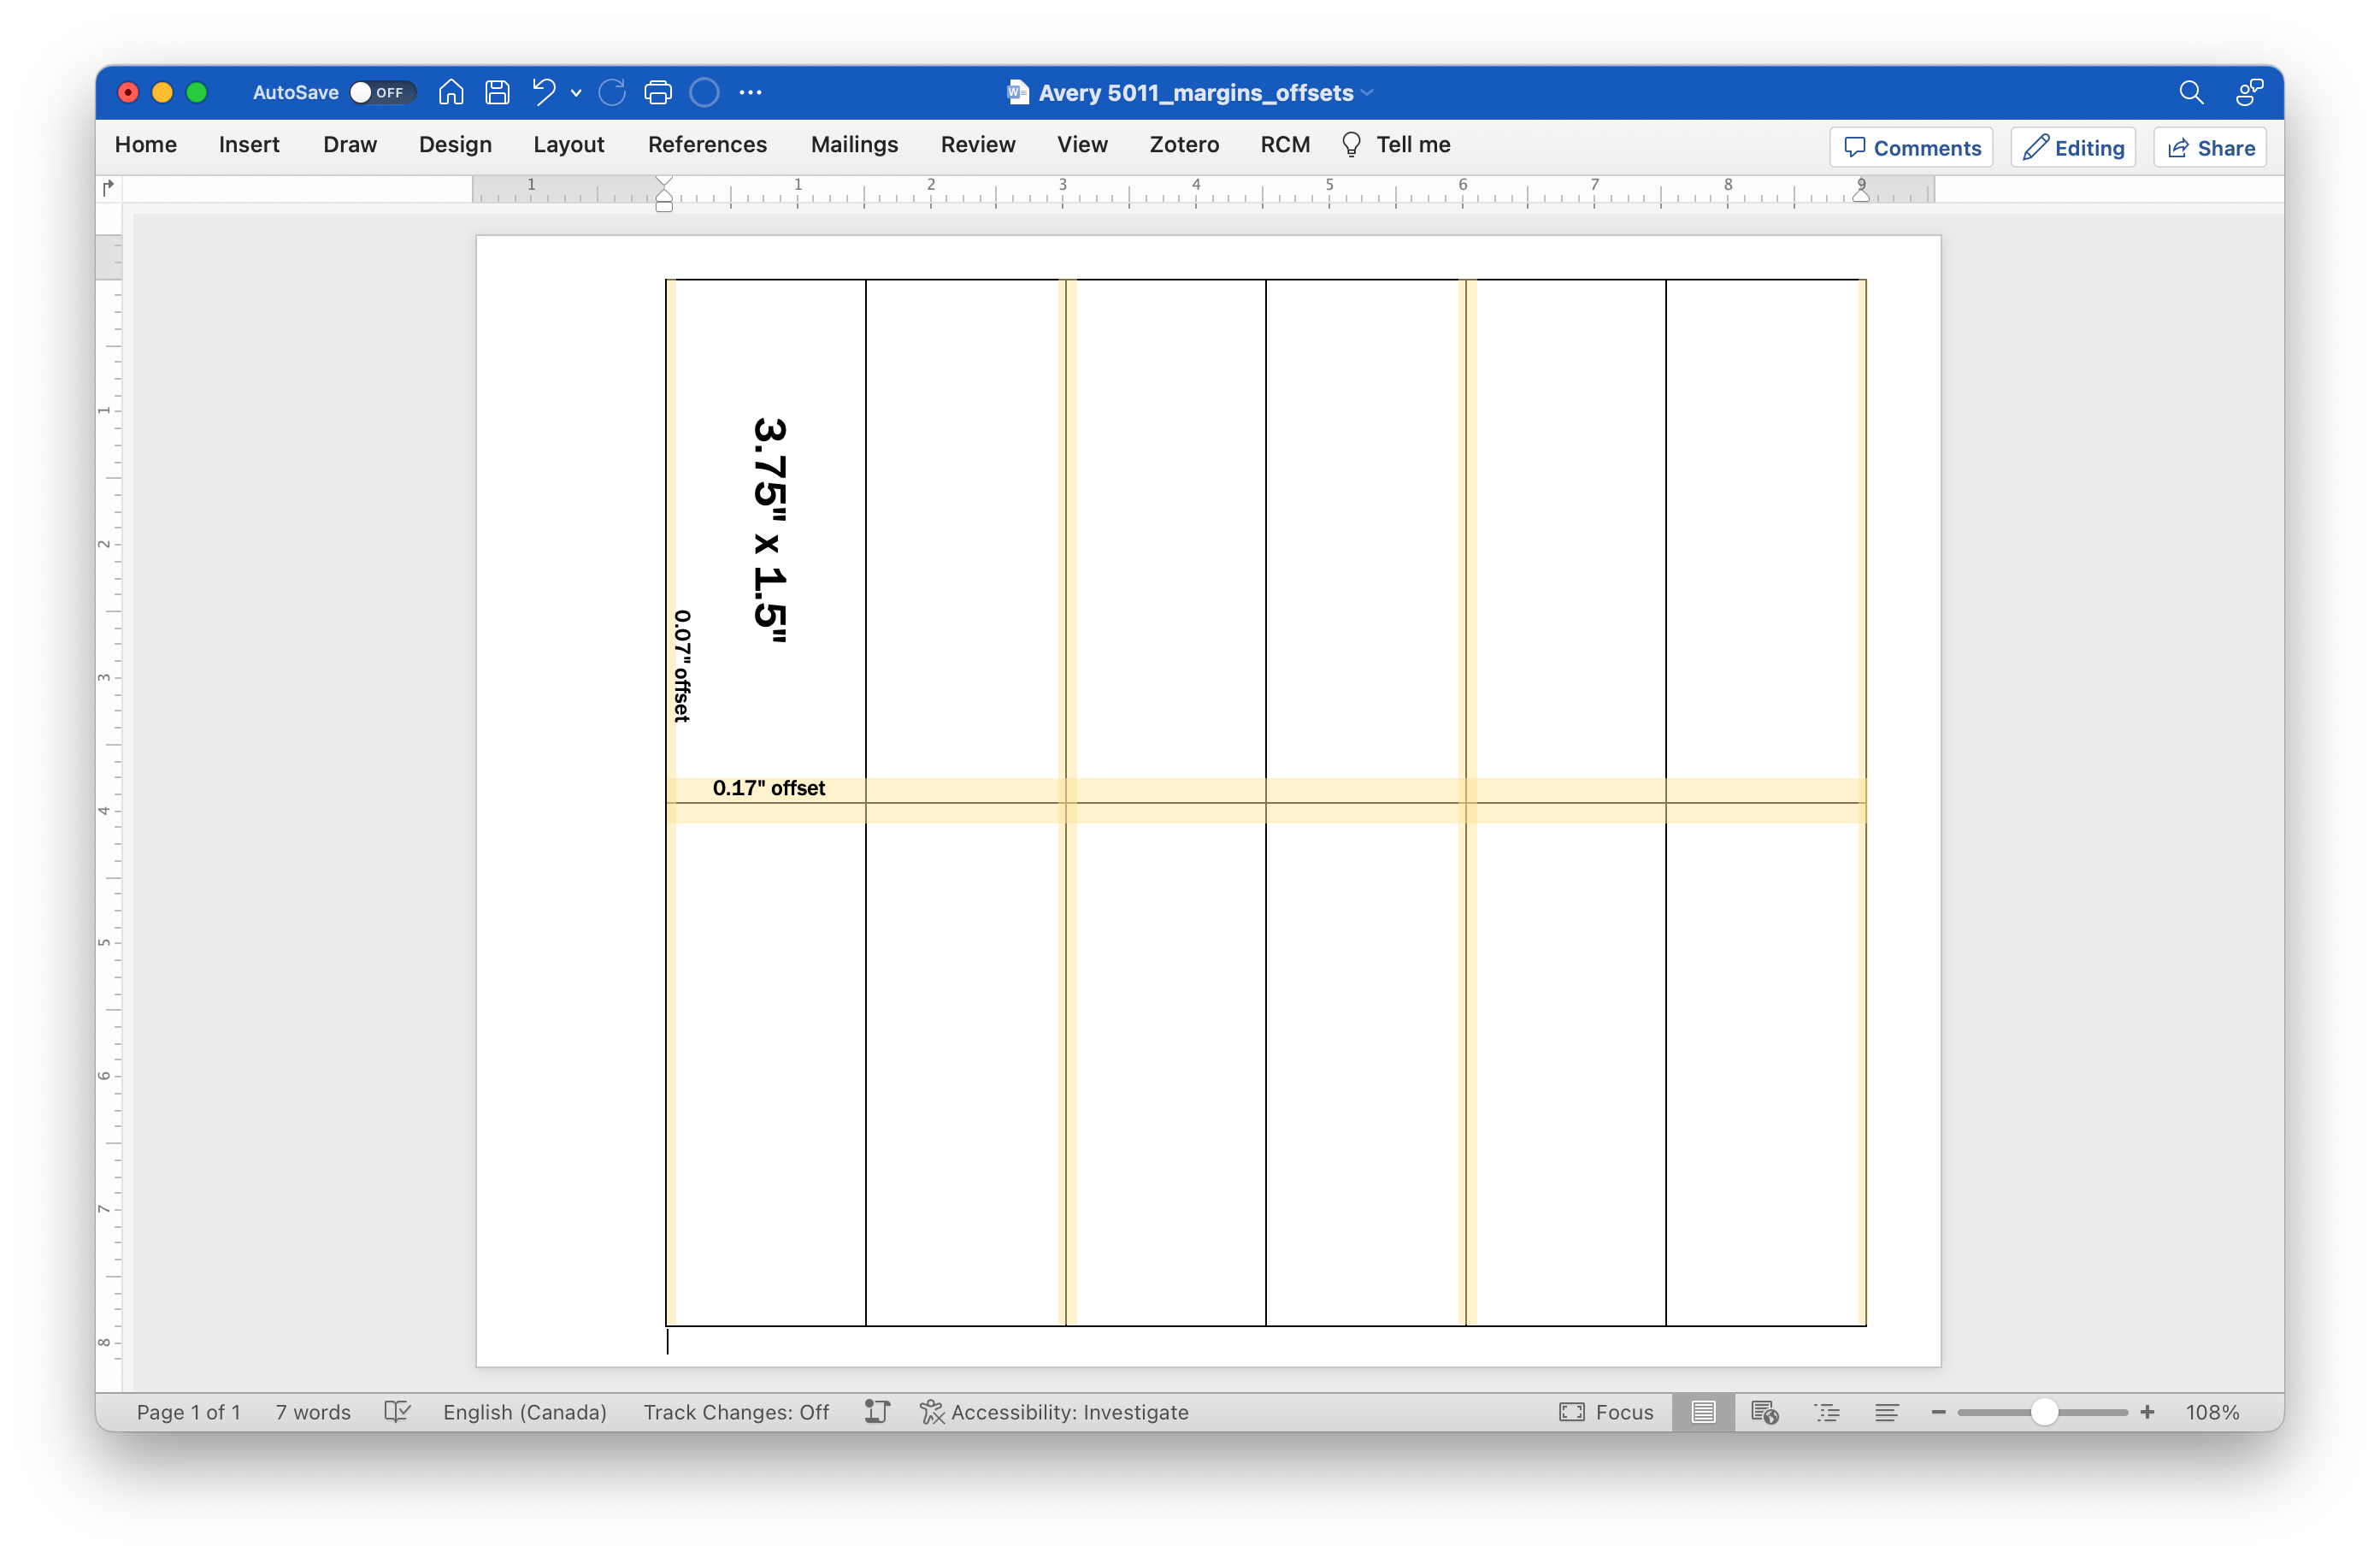 Microsoft Word application window showing the table dimensions for Avery 5011